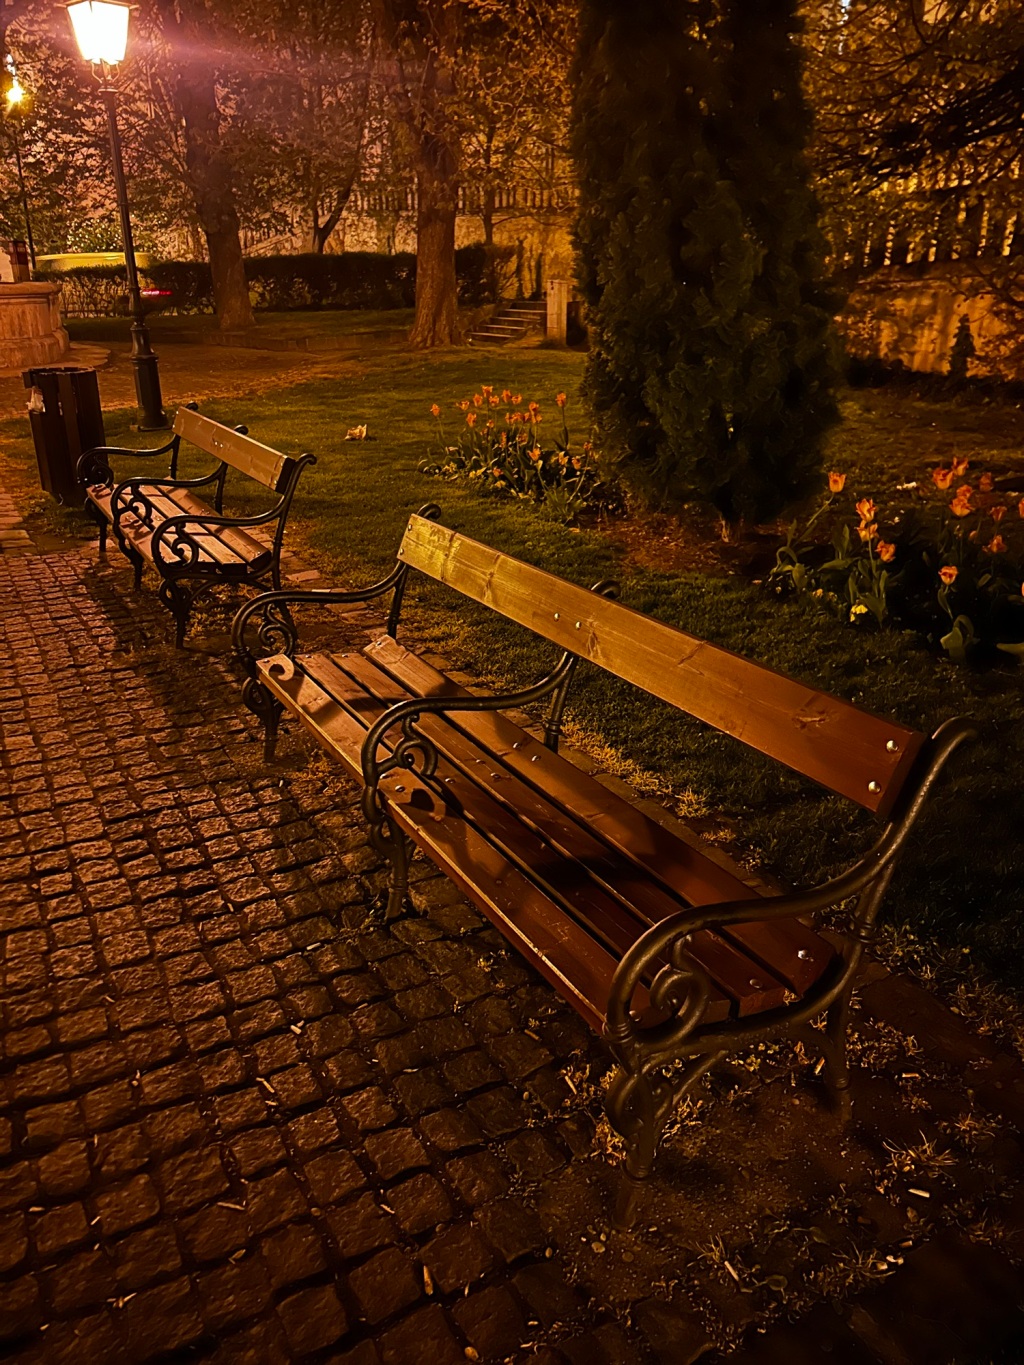 This park bench is a coffin